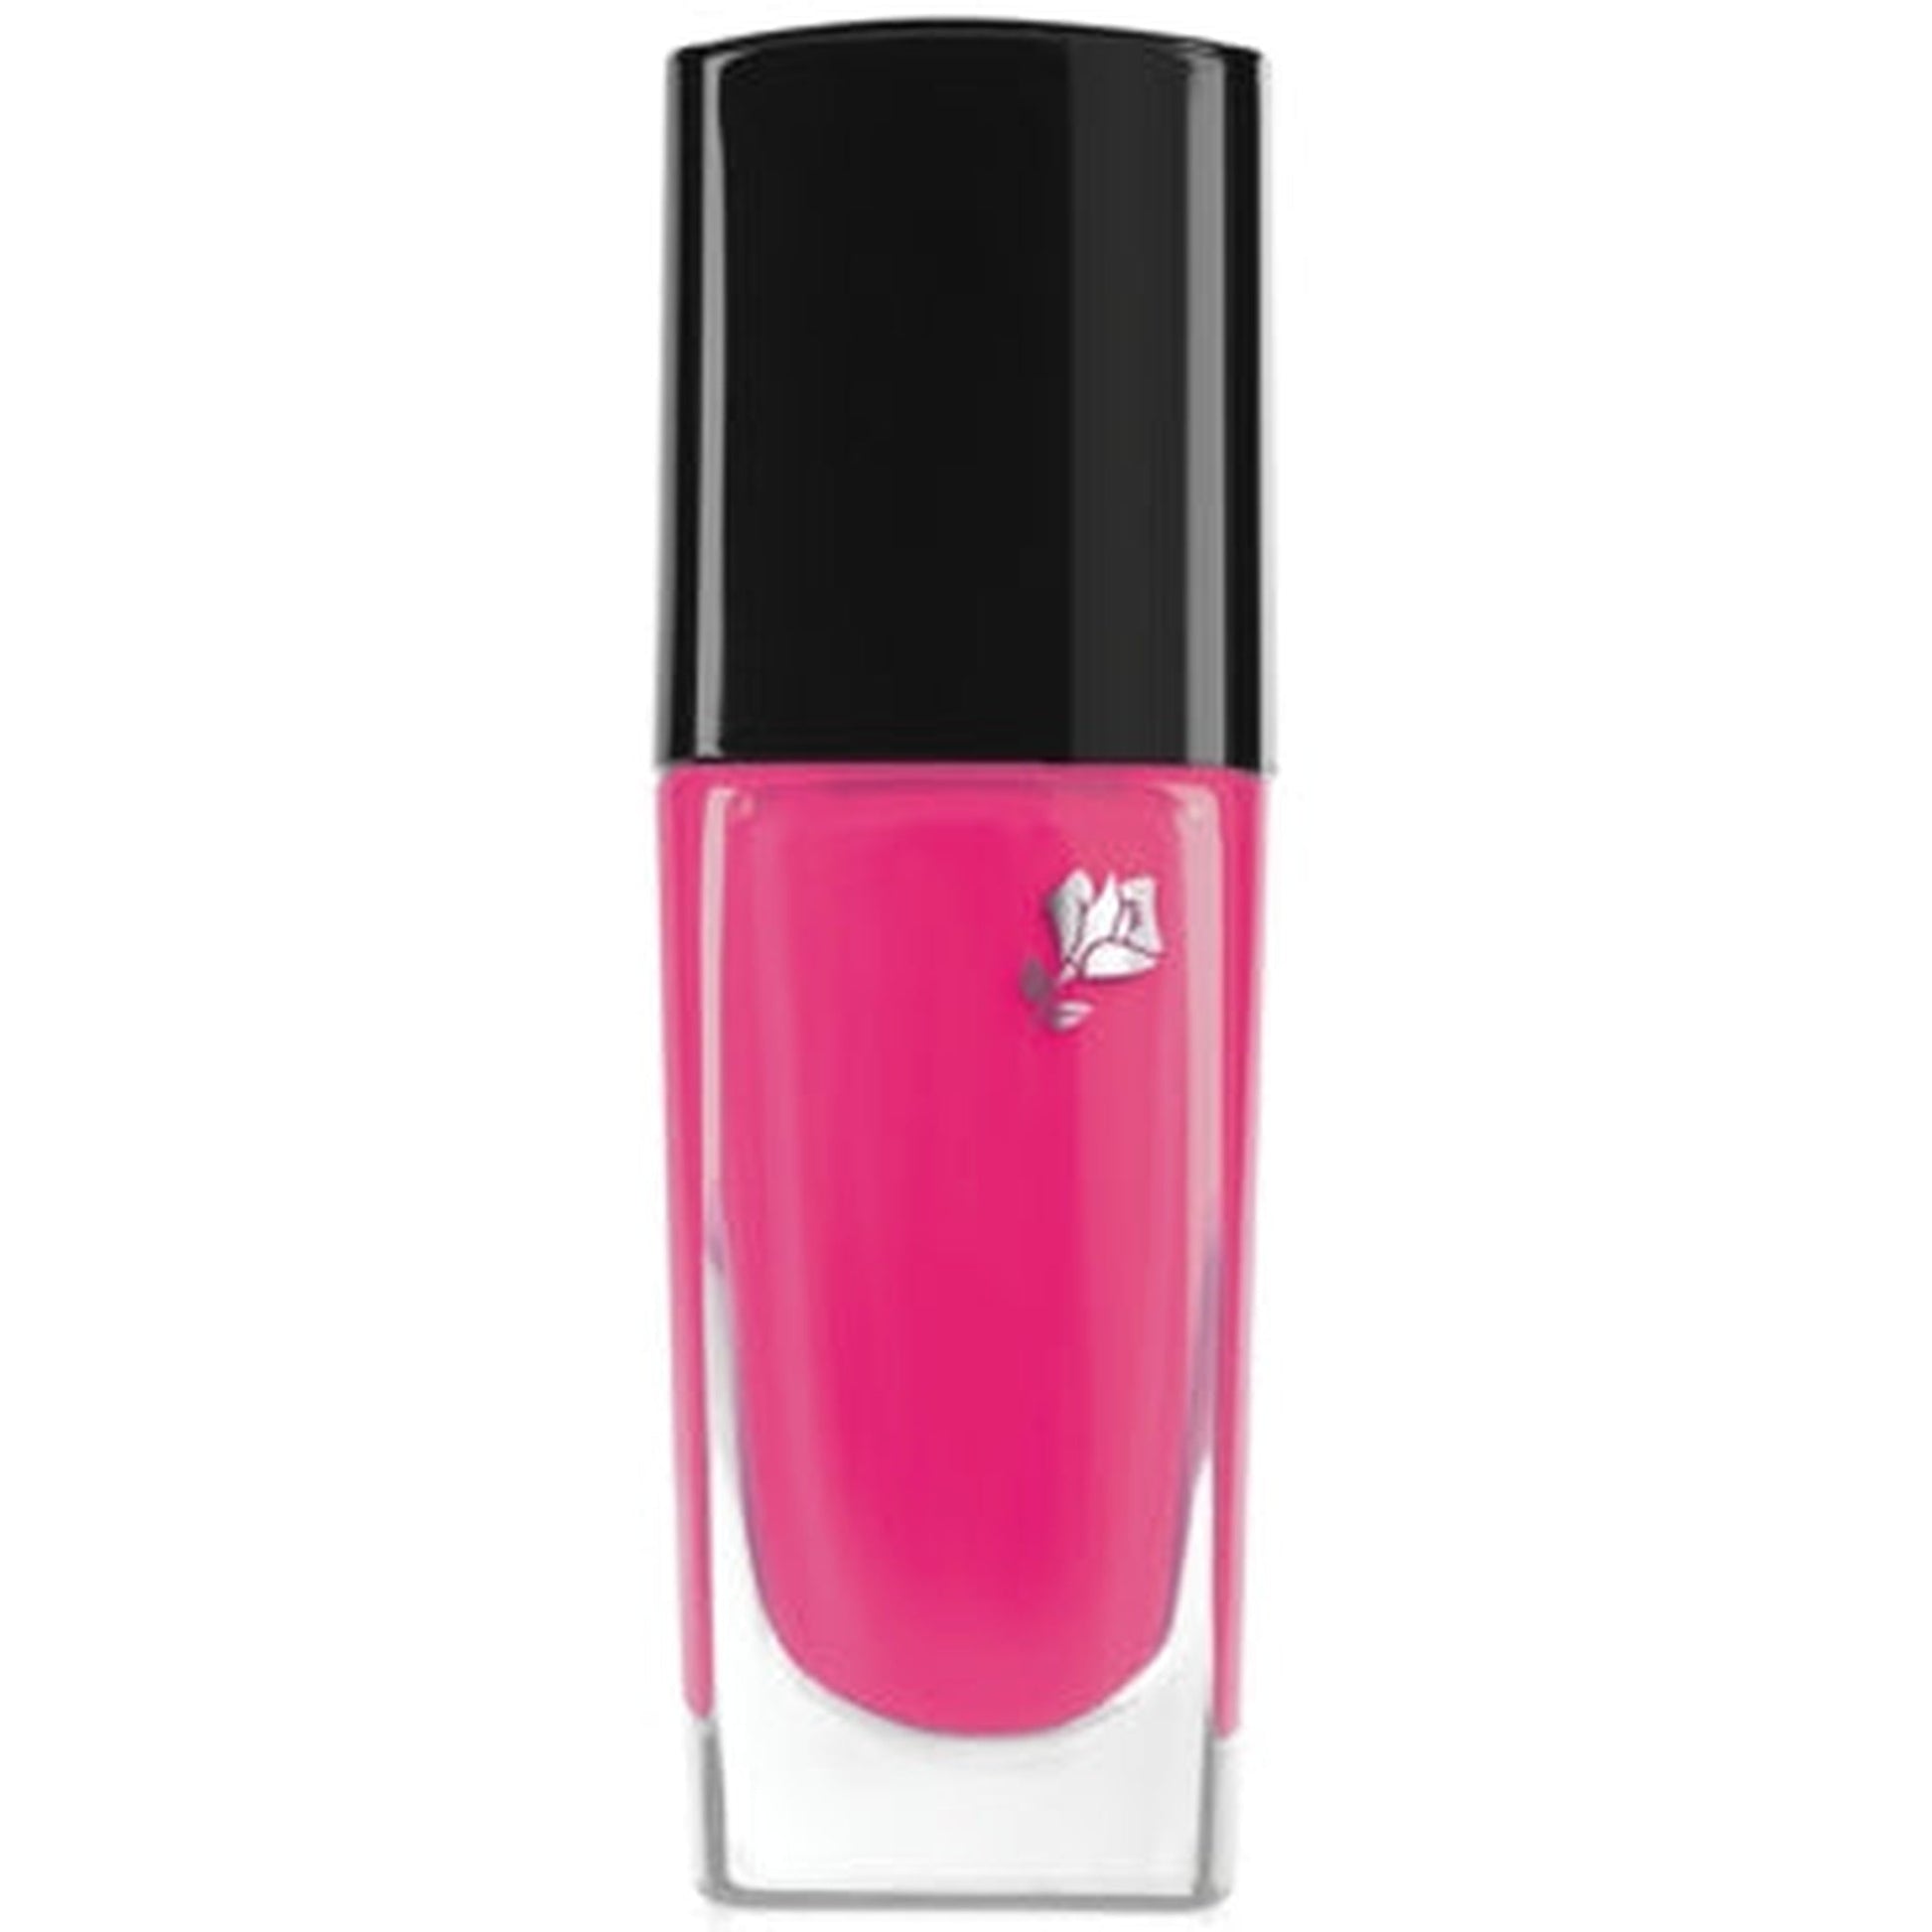 Lancome Vernis In Love Nail Polish 351B Rose Des Nymphes-LANCOME-BeautyNmakeup.co.uk